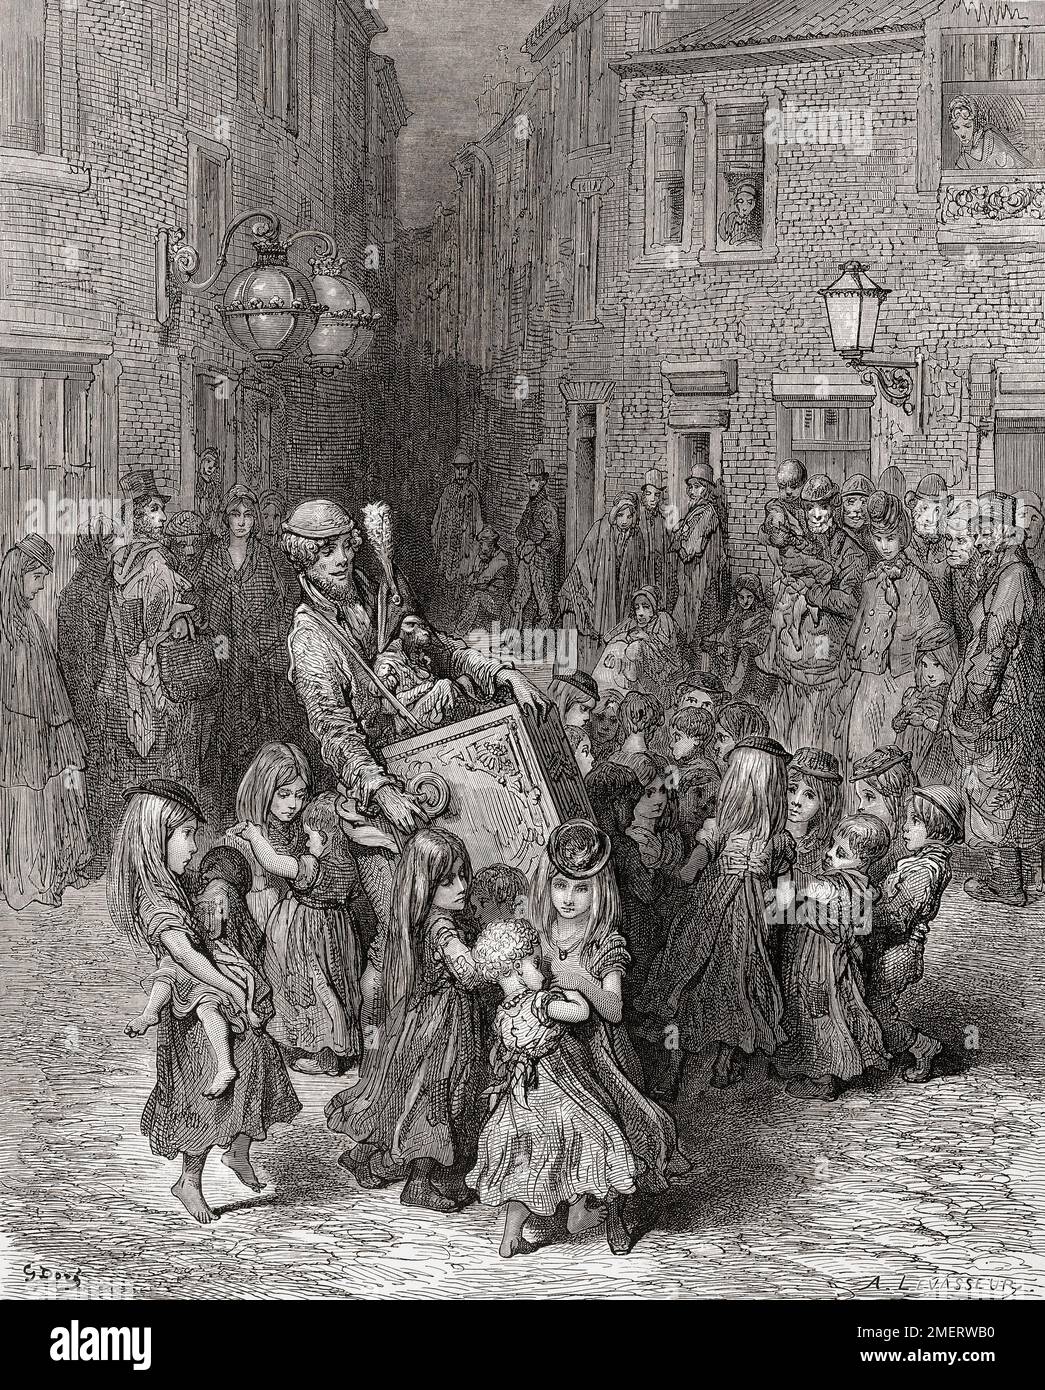 Children dance and play around an organ grinder and his monkey in 19th century London. After an illustration by Gustave Doré in the 1890 American edition of London: A Pilgrimage written by Blanchard Jerrold and illustrated by Gustave Doré. Stock Photo